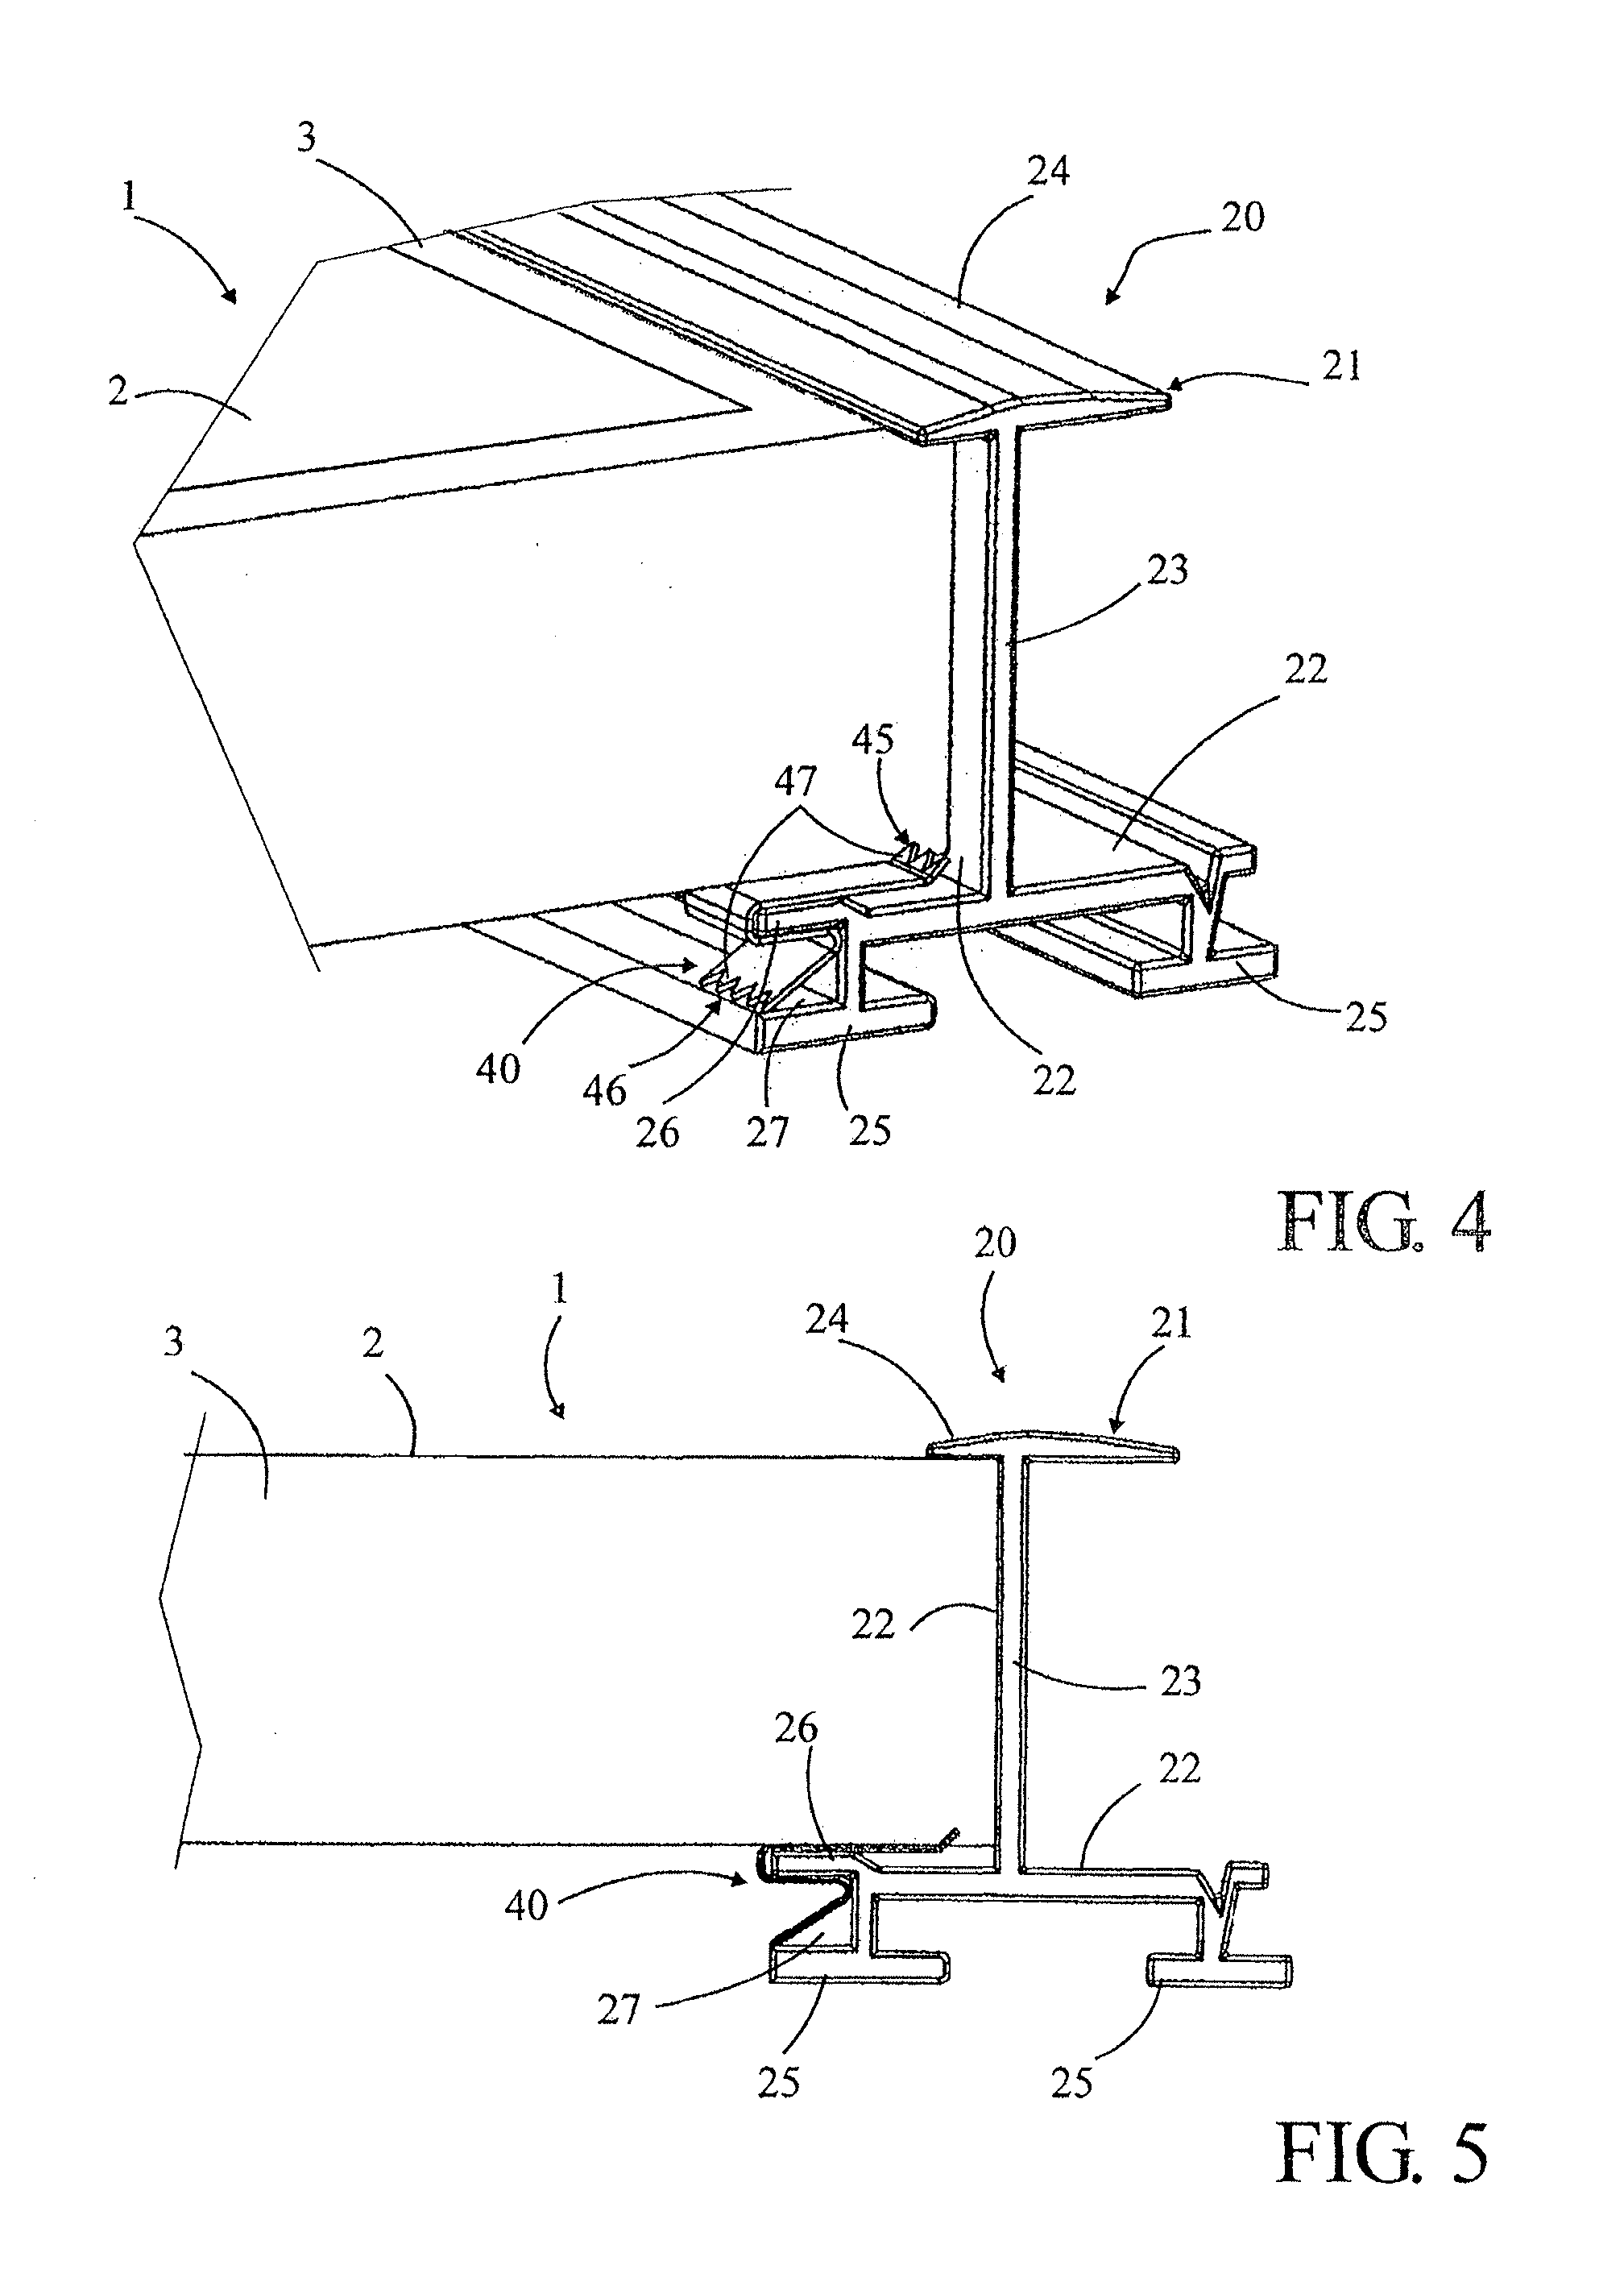 Separate connection device for grounding electrical equipment comprising a plurality for separate electrical components